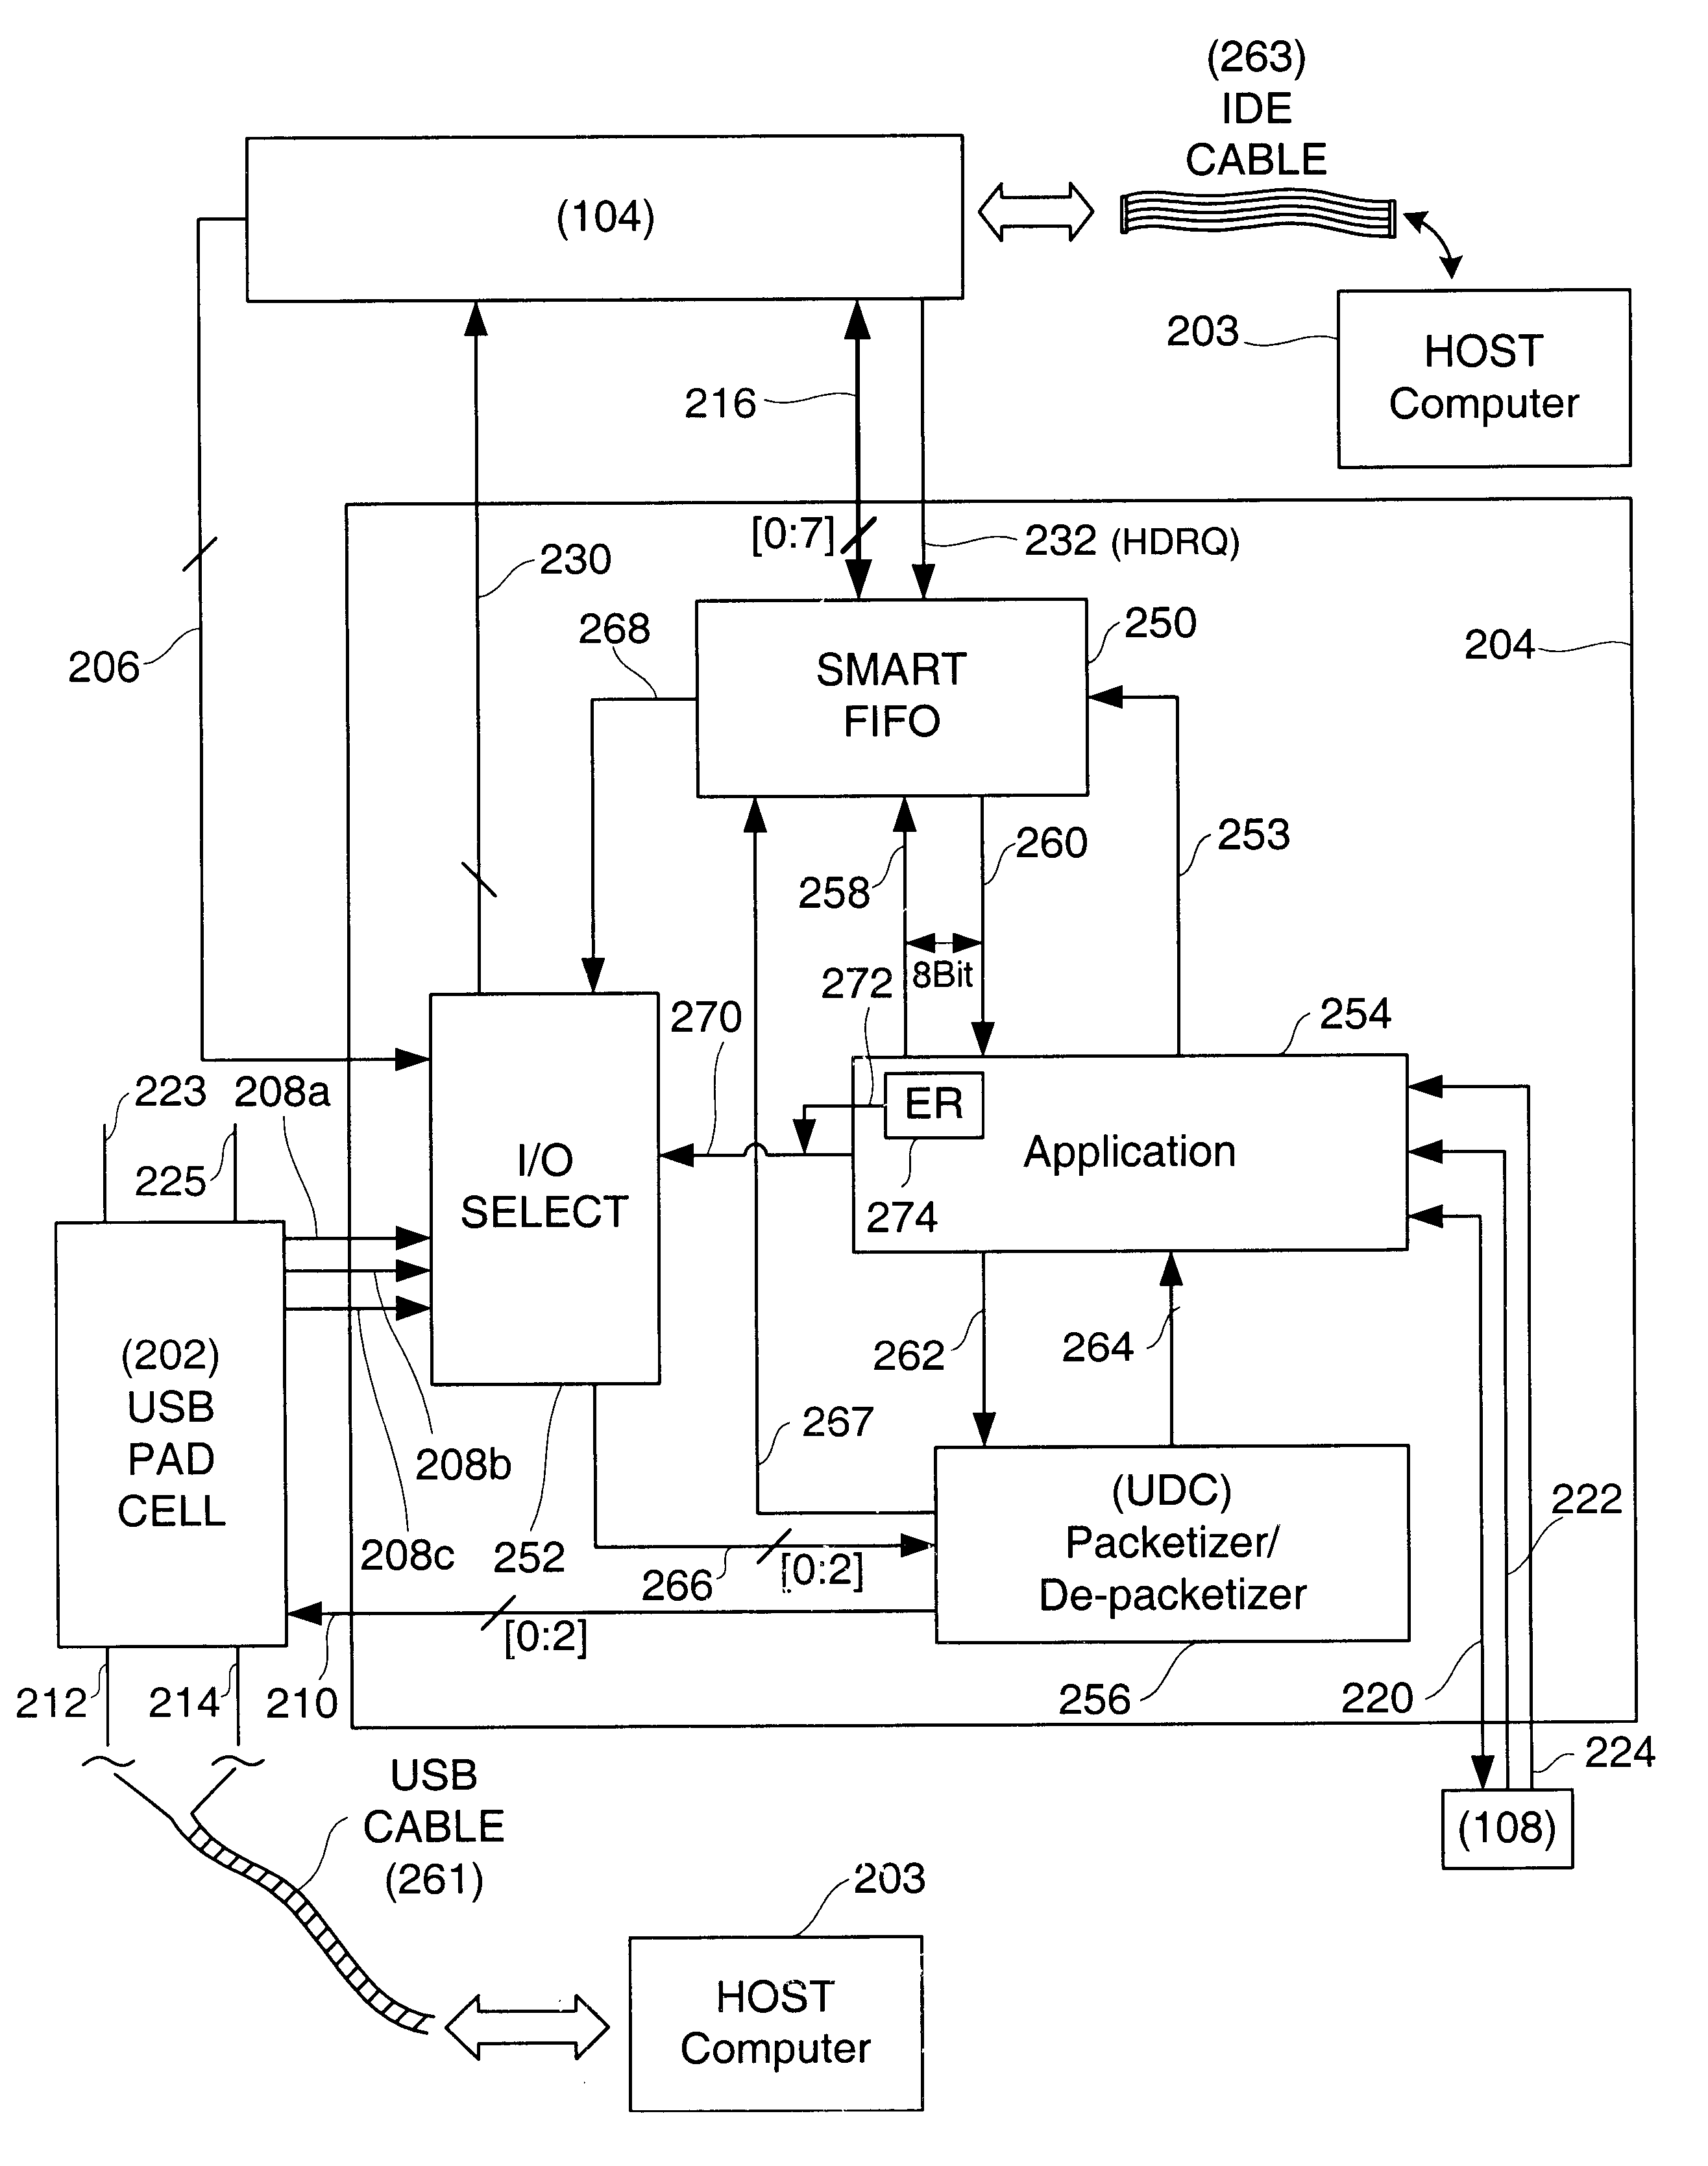 Controller for ATAPI mode operation and ATAPI driven universal serial bus mode operation and methods for making the same